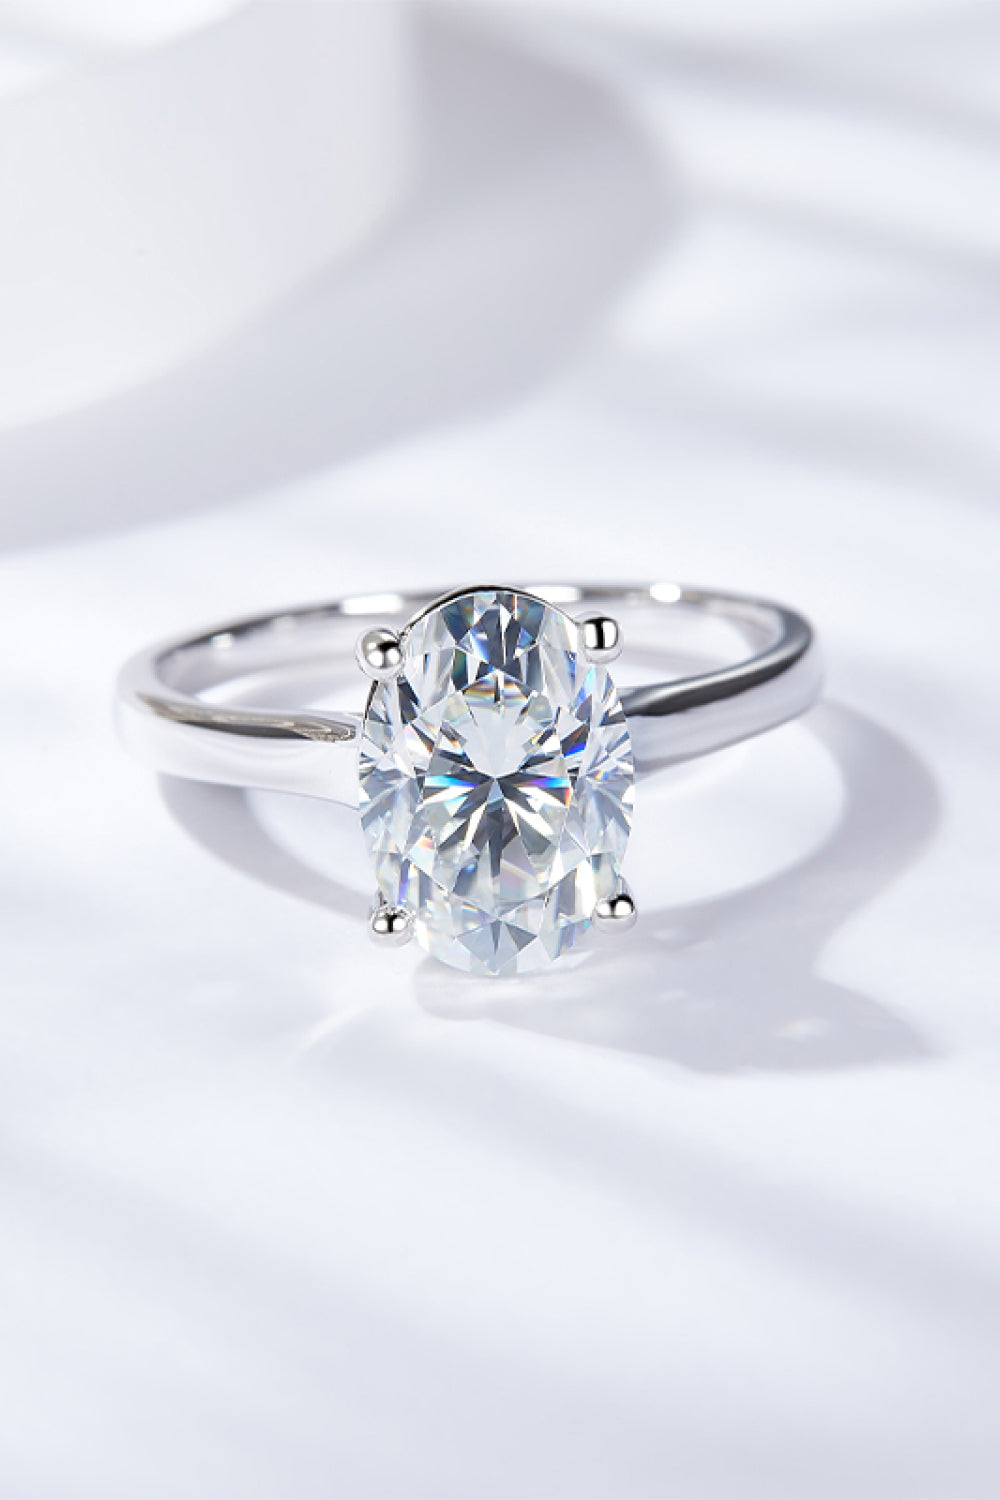 2.5 Carat Moissanite Solitaire Ring - Cheeky Chic Boutique